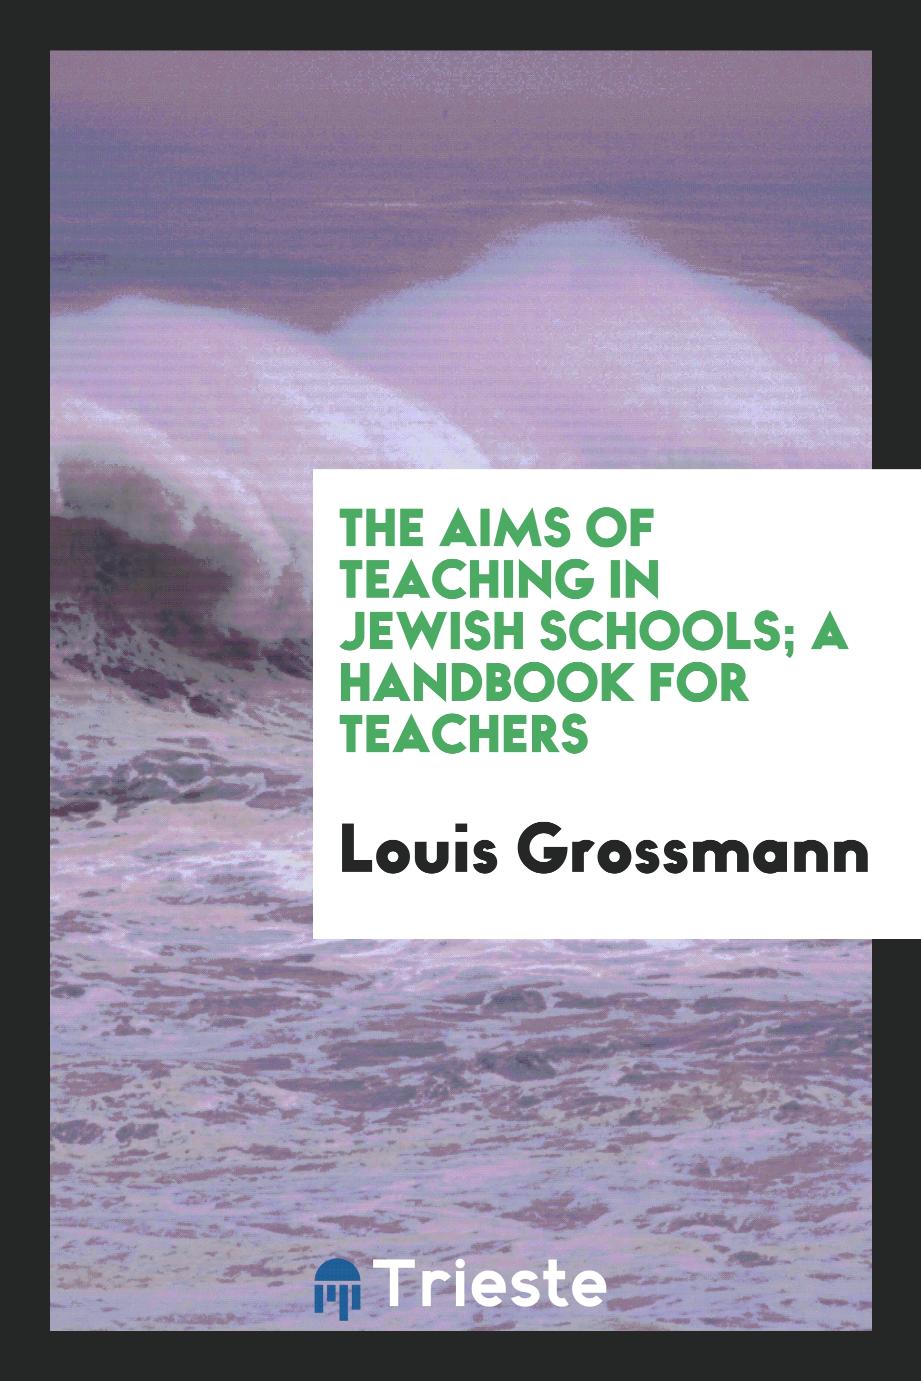 The aims of teaching in Jewish schools; a handbook for teachers